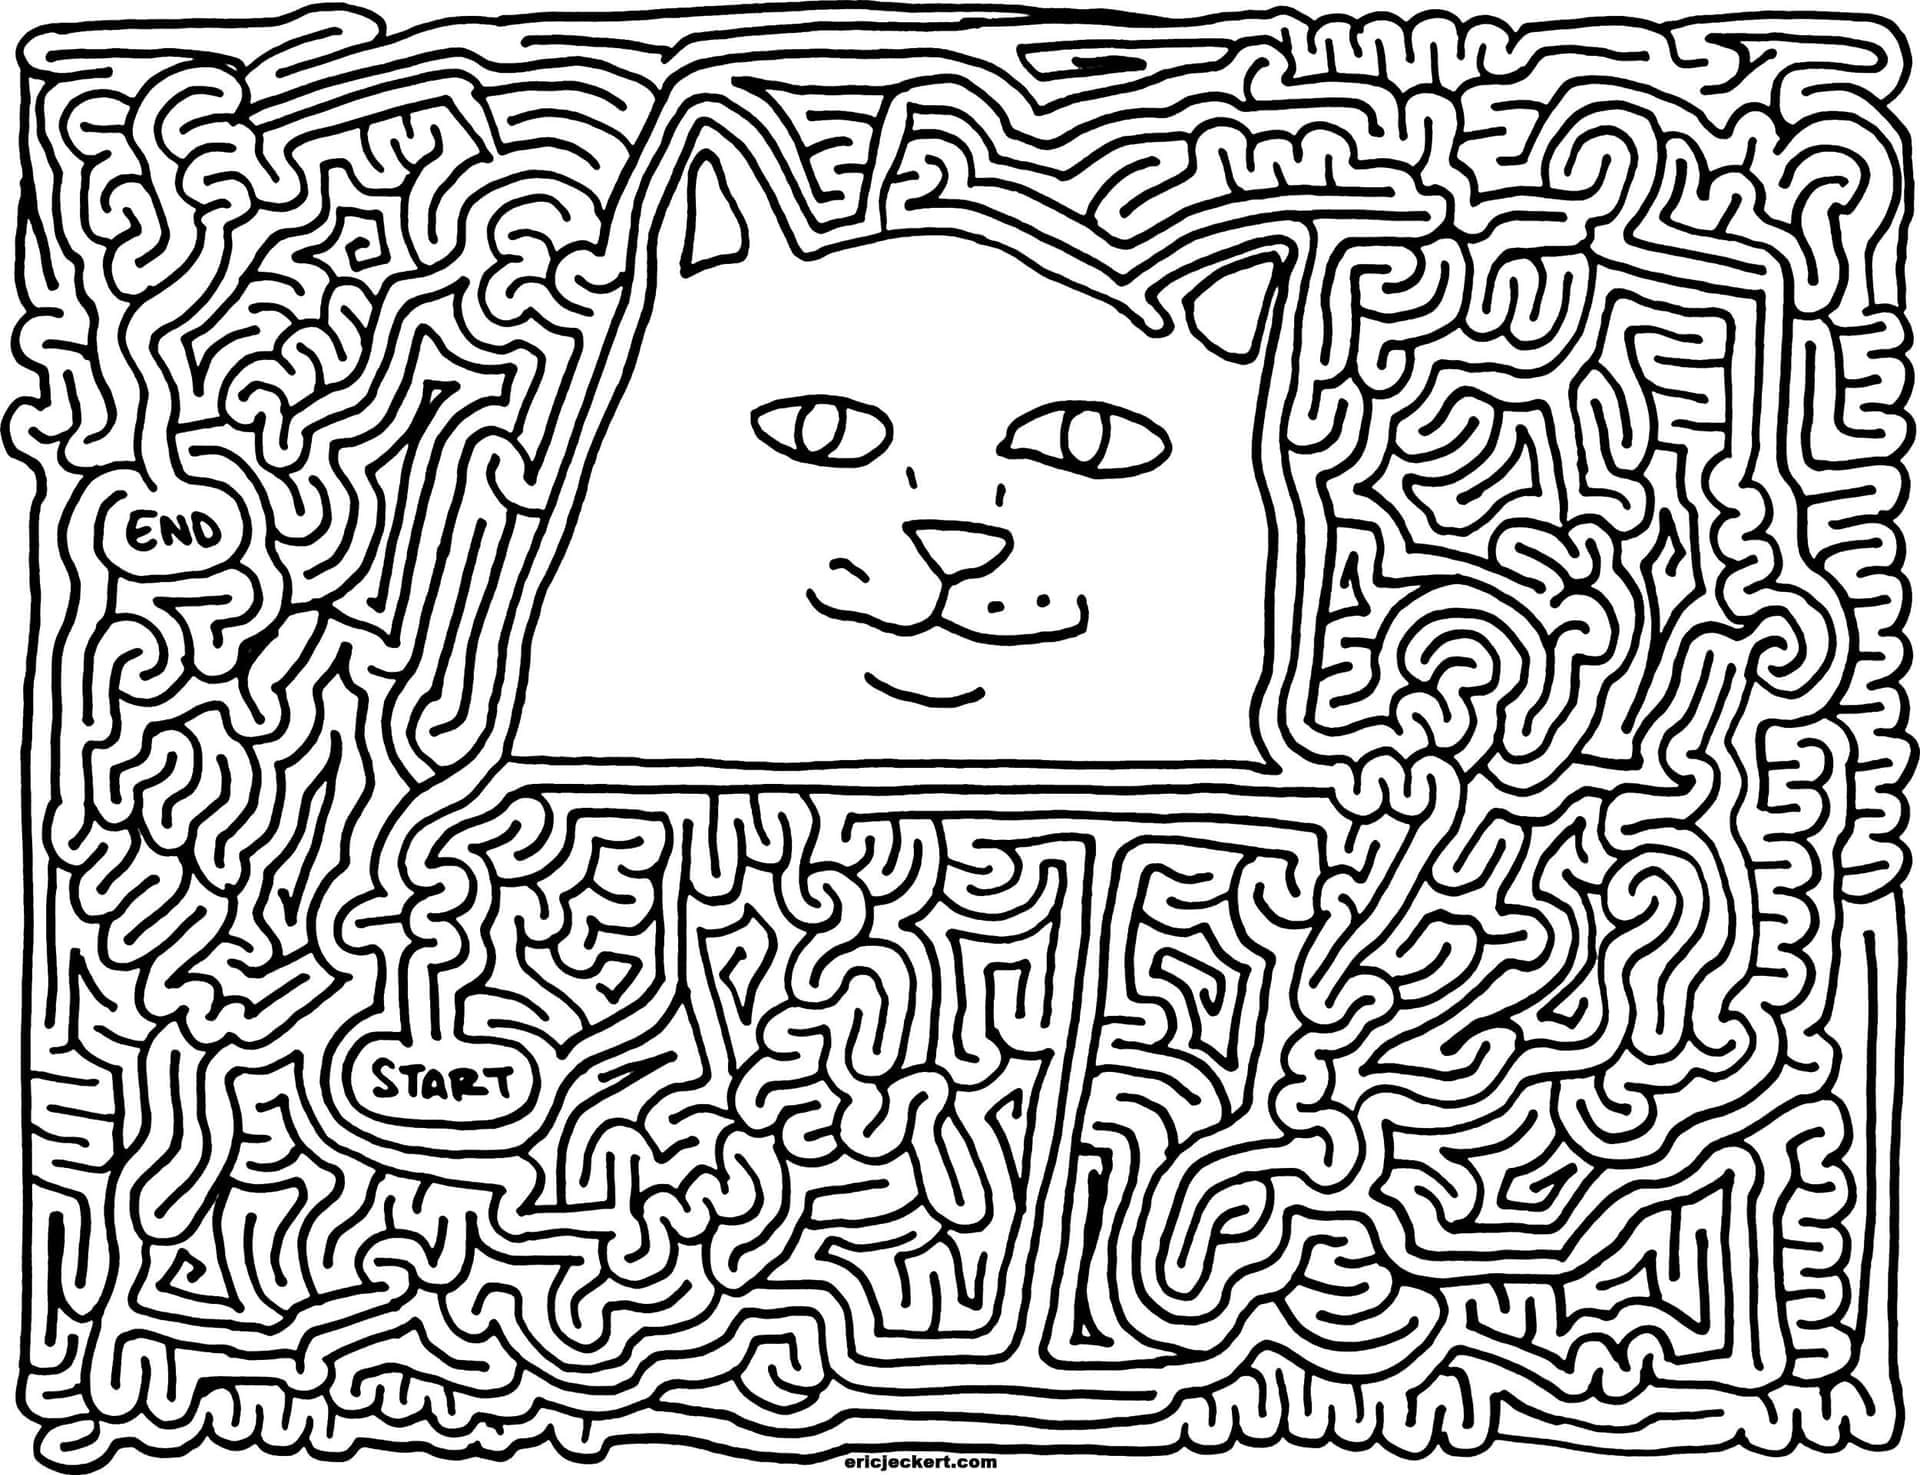 A Cat In A Maze With A Maze Wallpaper